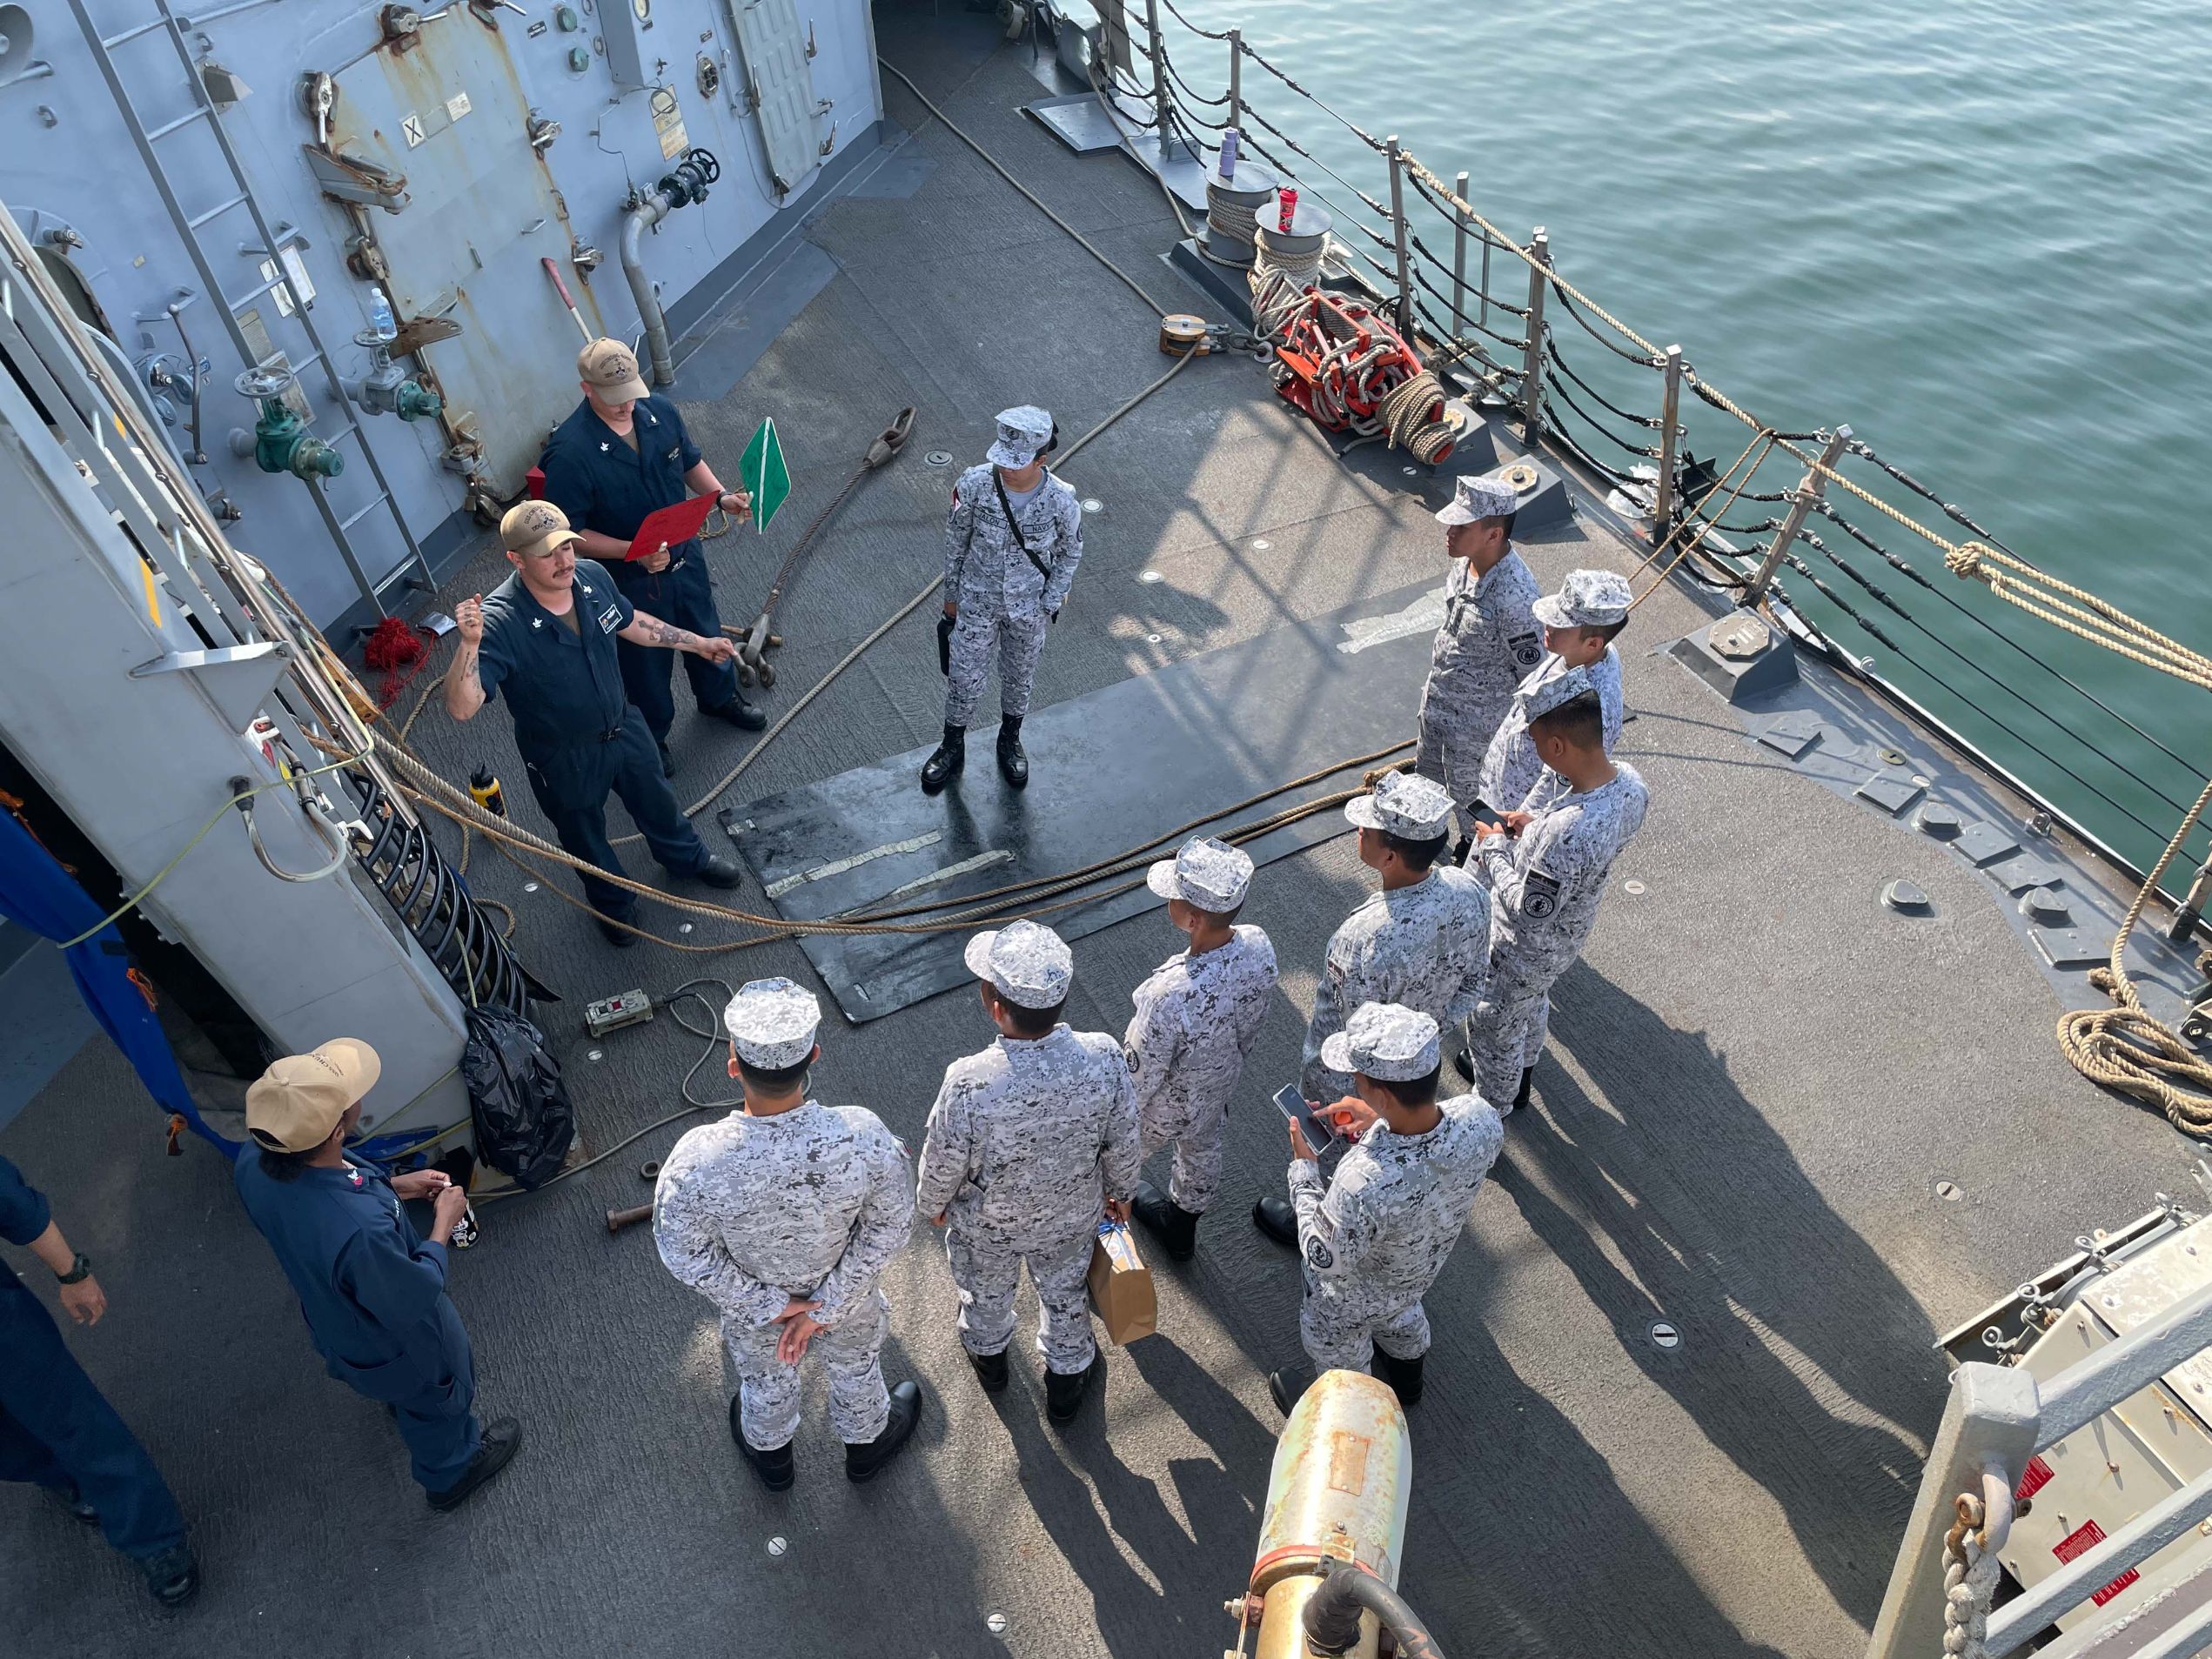 SUBIC BAY, PHILIPPINES (April 17, 2023) Boatswain’s Mate 2nd Class Josemaria Garcia gives underway replenishment training to Philippine Navy Sailors assigned to the Phoang-class corvette BRP Conrado Yap